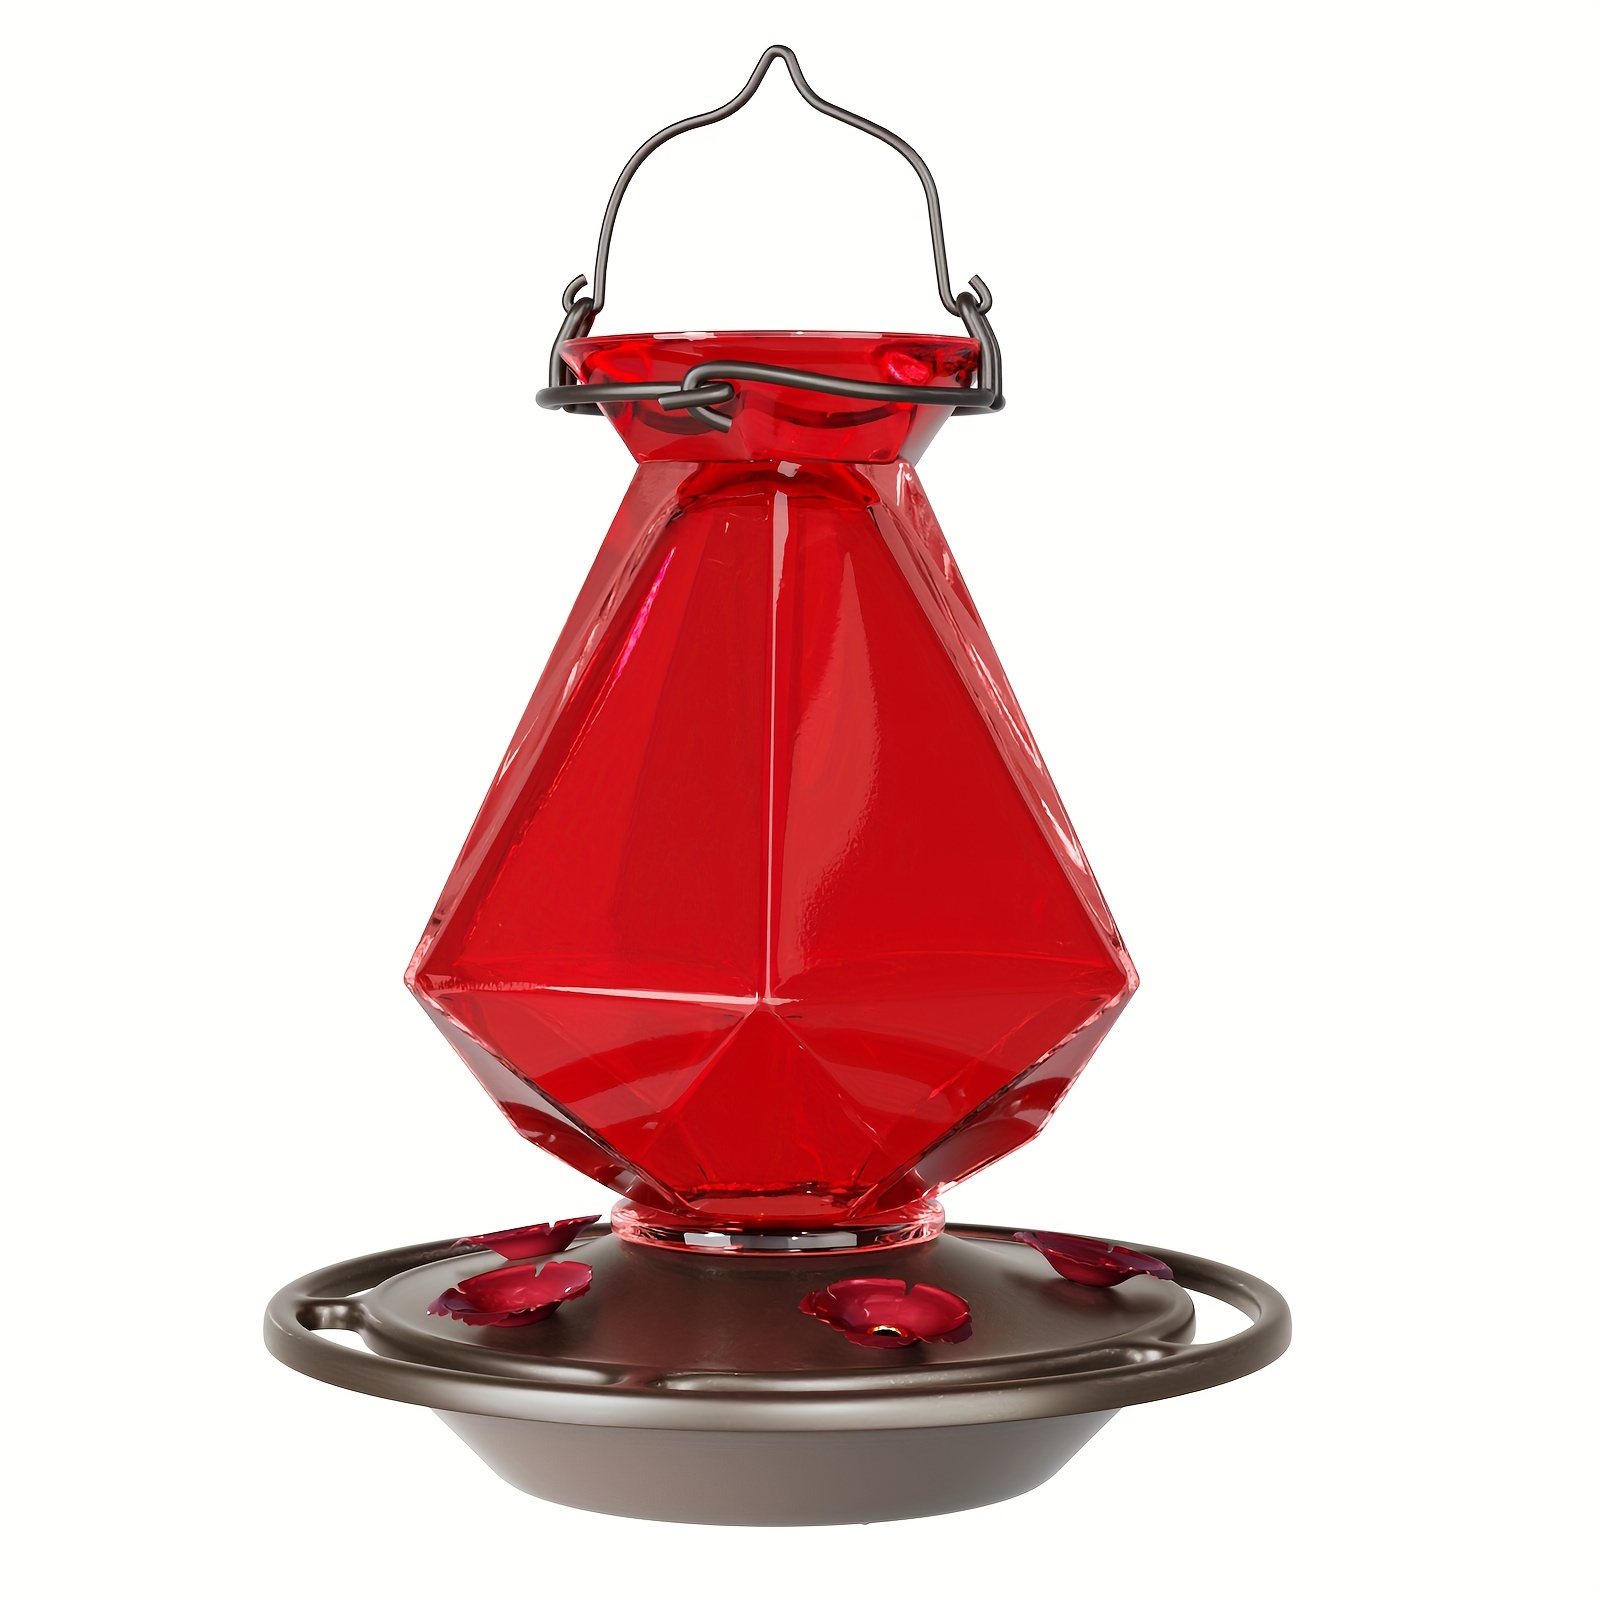 

Hummingbird Feeders For Outdoors Hanging, Red Glass Hummingbird Feeder With 5 Feeding Ports & 5 Perches, 23 Ounces, Rustproof, Leakproof, Geometric Line Shapes